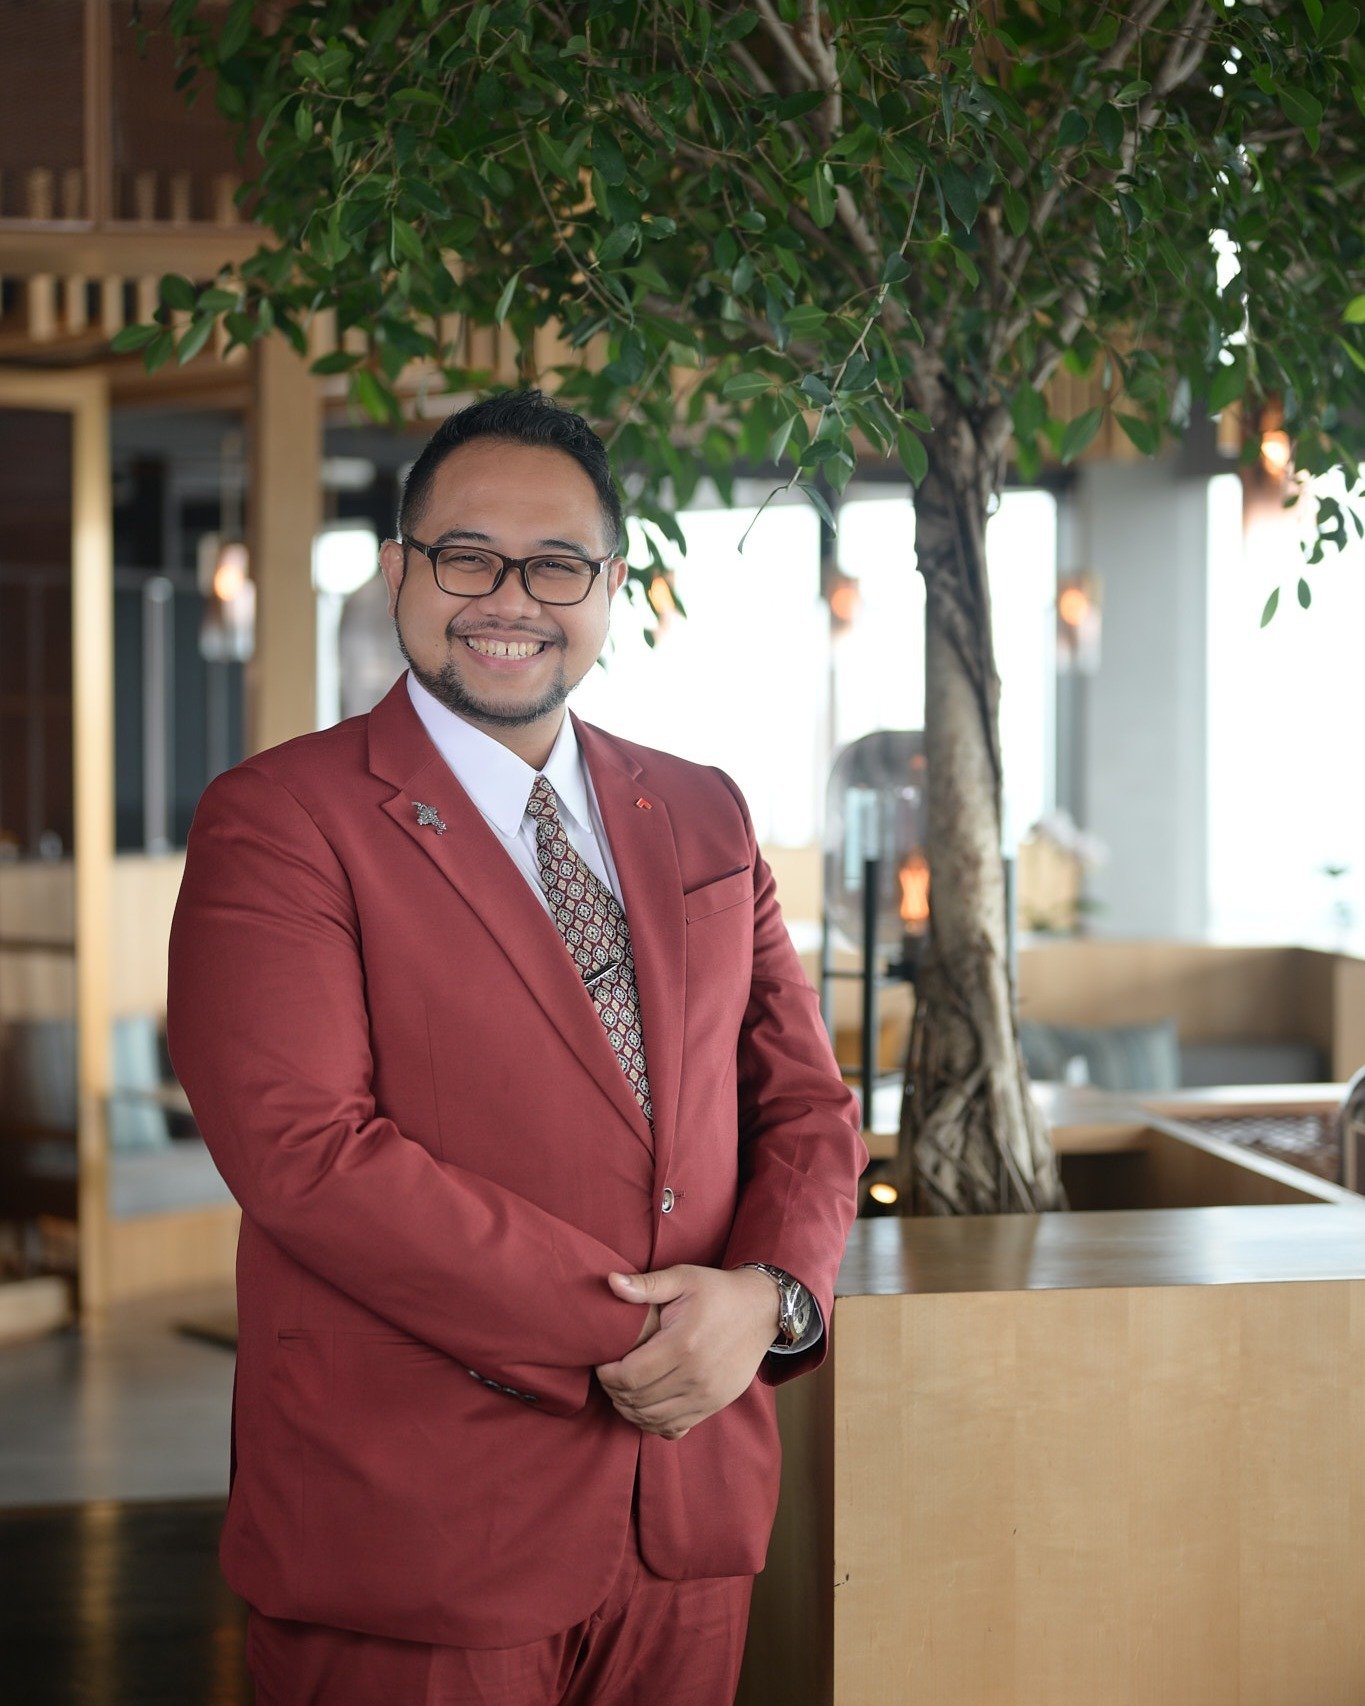 Meet Samuel, our new Head Sommelier at SKAI Restaurant &amp; SKAI Bar! 

Originally from Jakarta, Samuel's passion for the food and beverage industry began at a young age, leading to an impressive 24 years of experience. Samuel holds certifications f